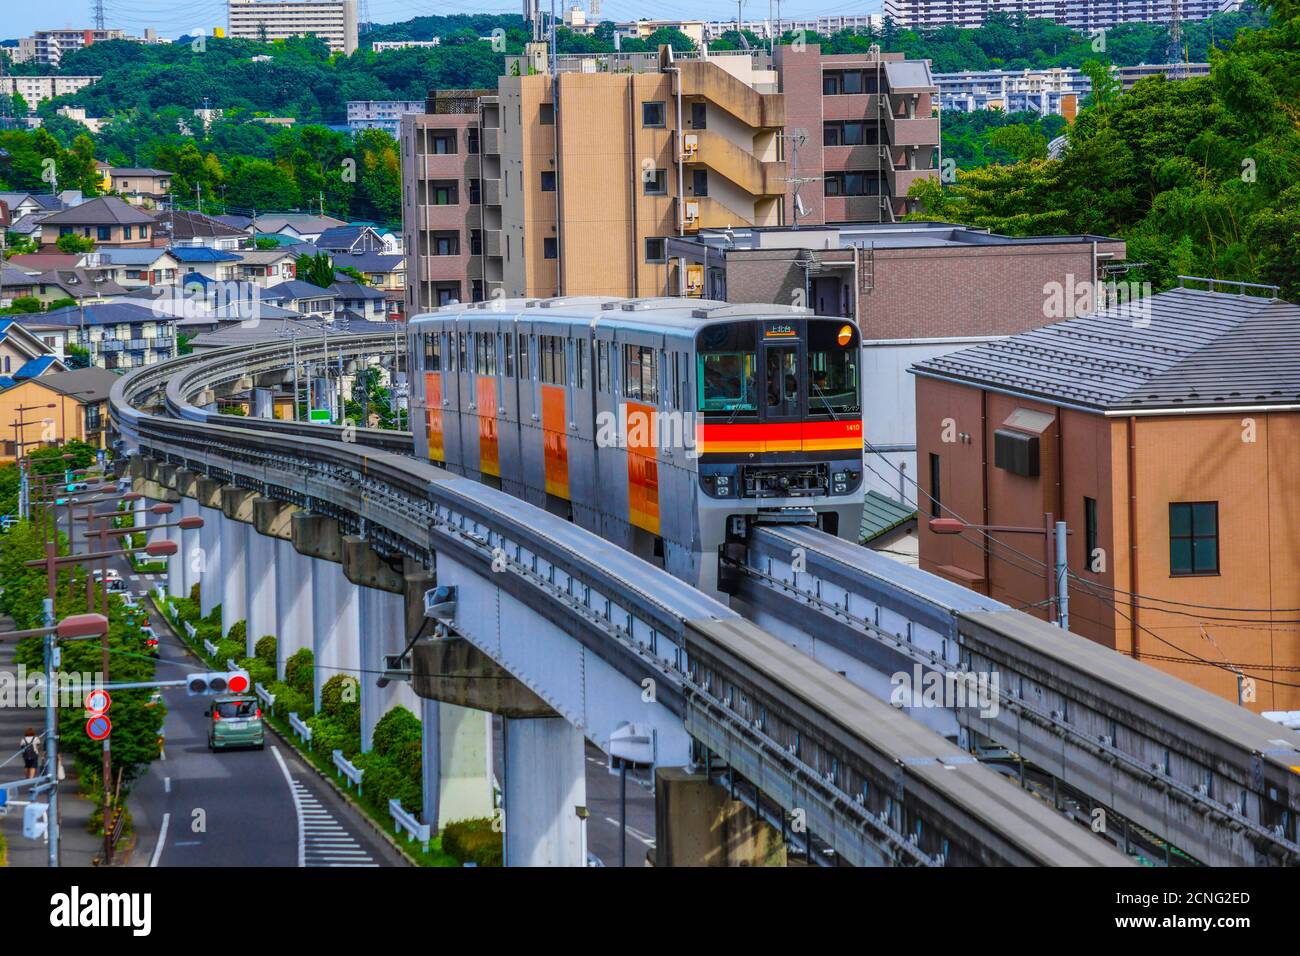 Tama monorail which runs a residential area Stock Photo